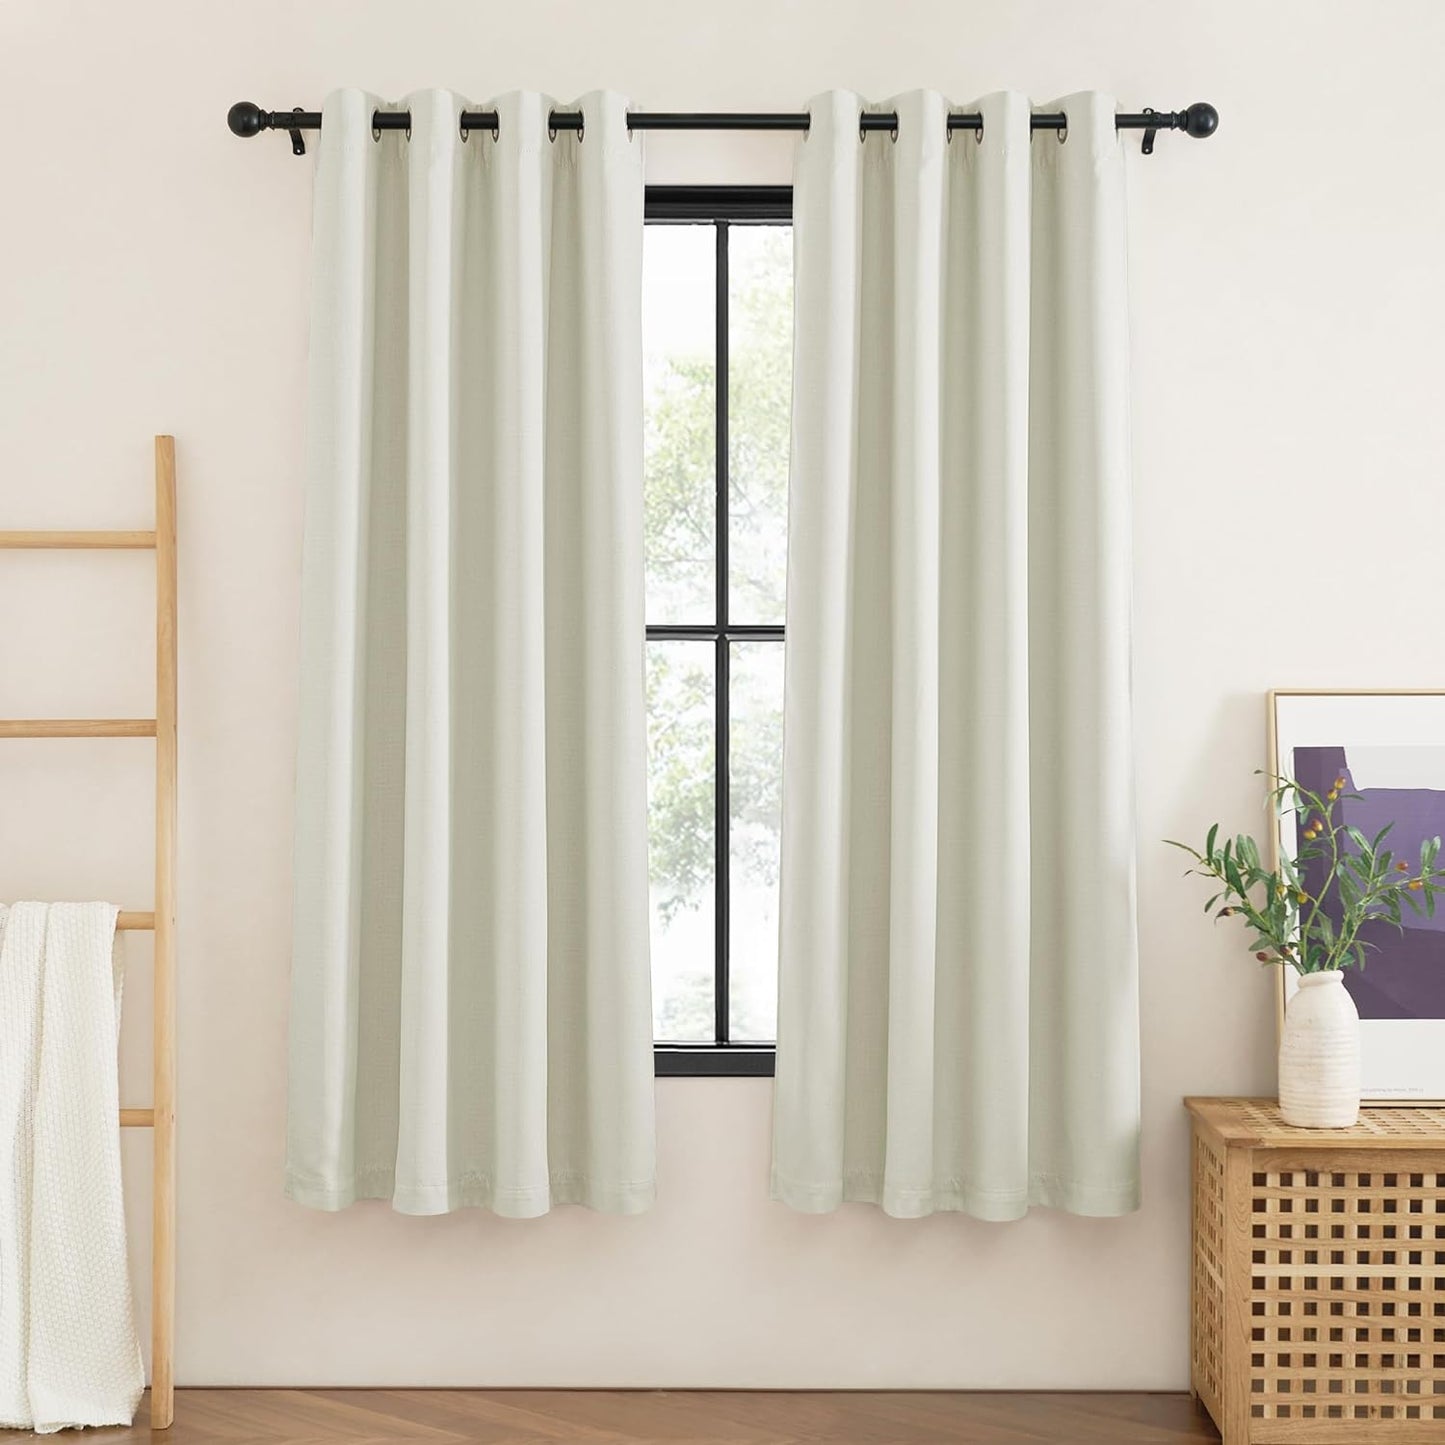 NICETOWN Thick Linen 100% Blackout Curtains for Living Room, Bronze Grommet 2 Layers Window Treatment with White Liner Thermal Curtains Sound Blocking for Bedroom, Natural, W52 X L96, 2 Panels  NICETOWN Thick Faux Linen W52 X L72 